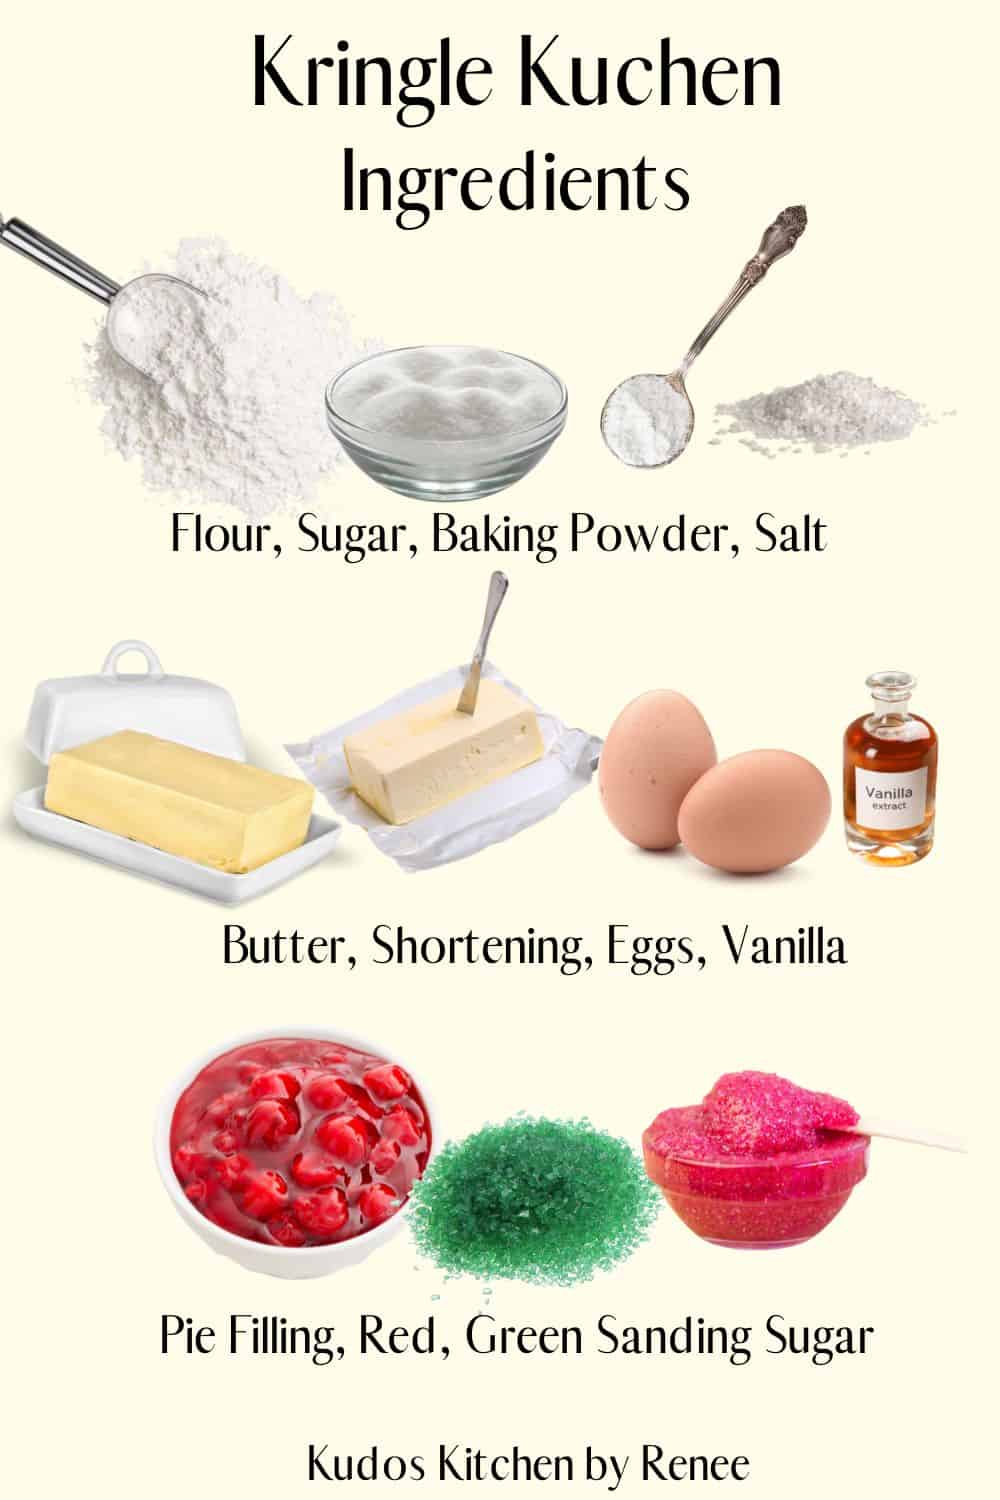 Visual ingredient list for how to make Kringle Kuchen.